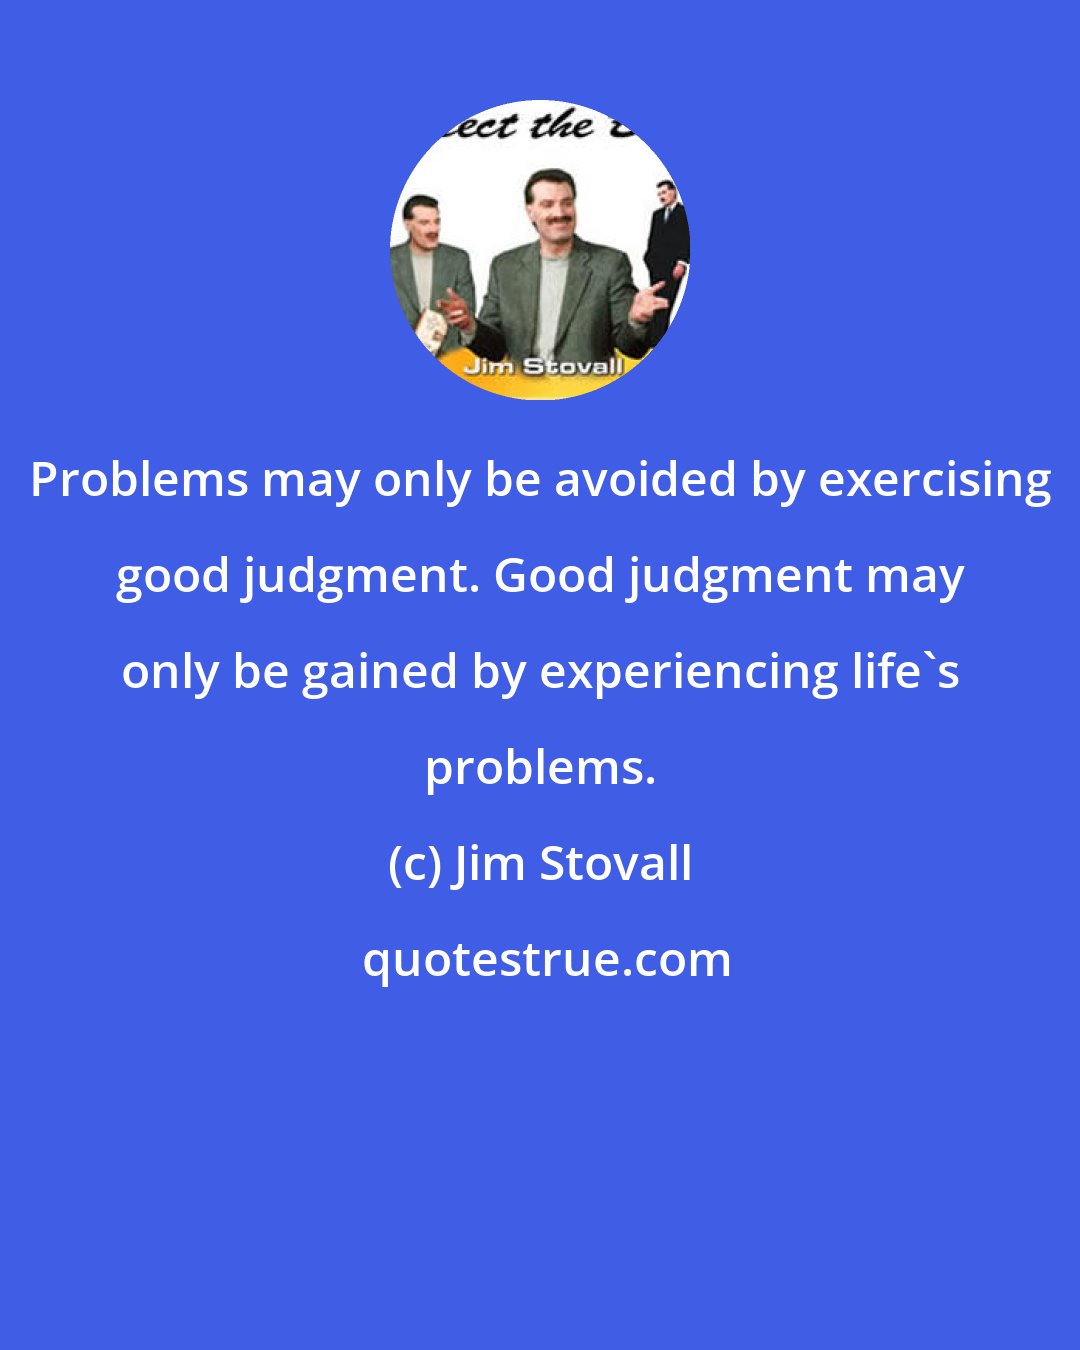 Jim Stovall: Problems may only be avoided by exercising good judgment. Good judgment may only be gained by experiencing life's problems.